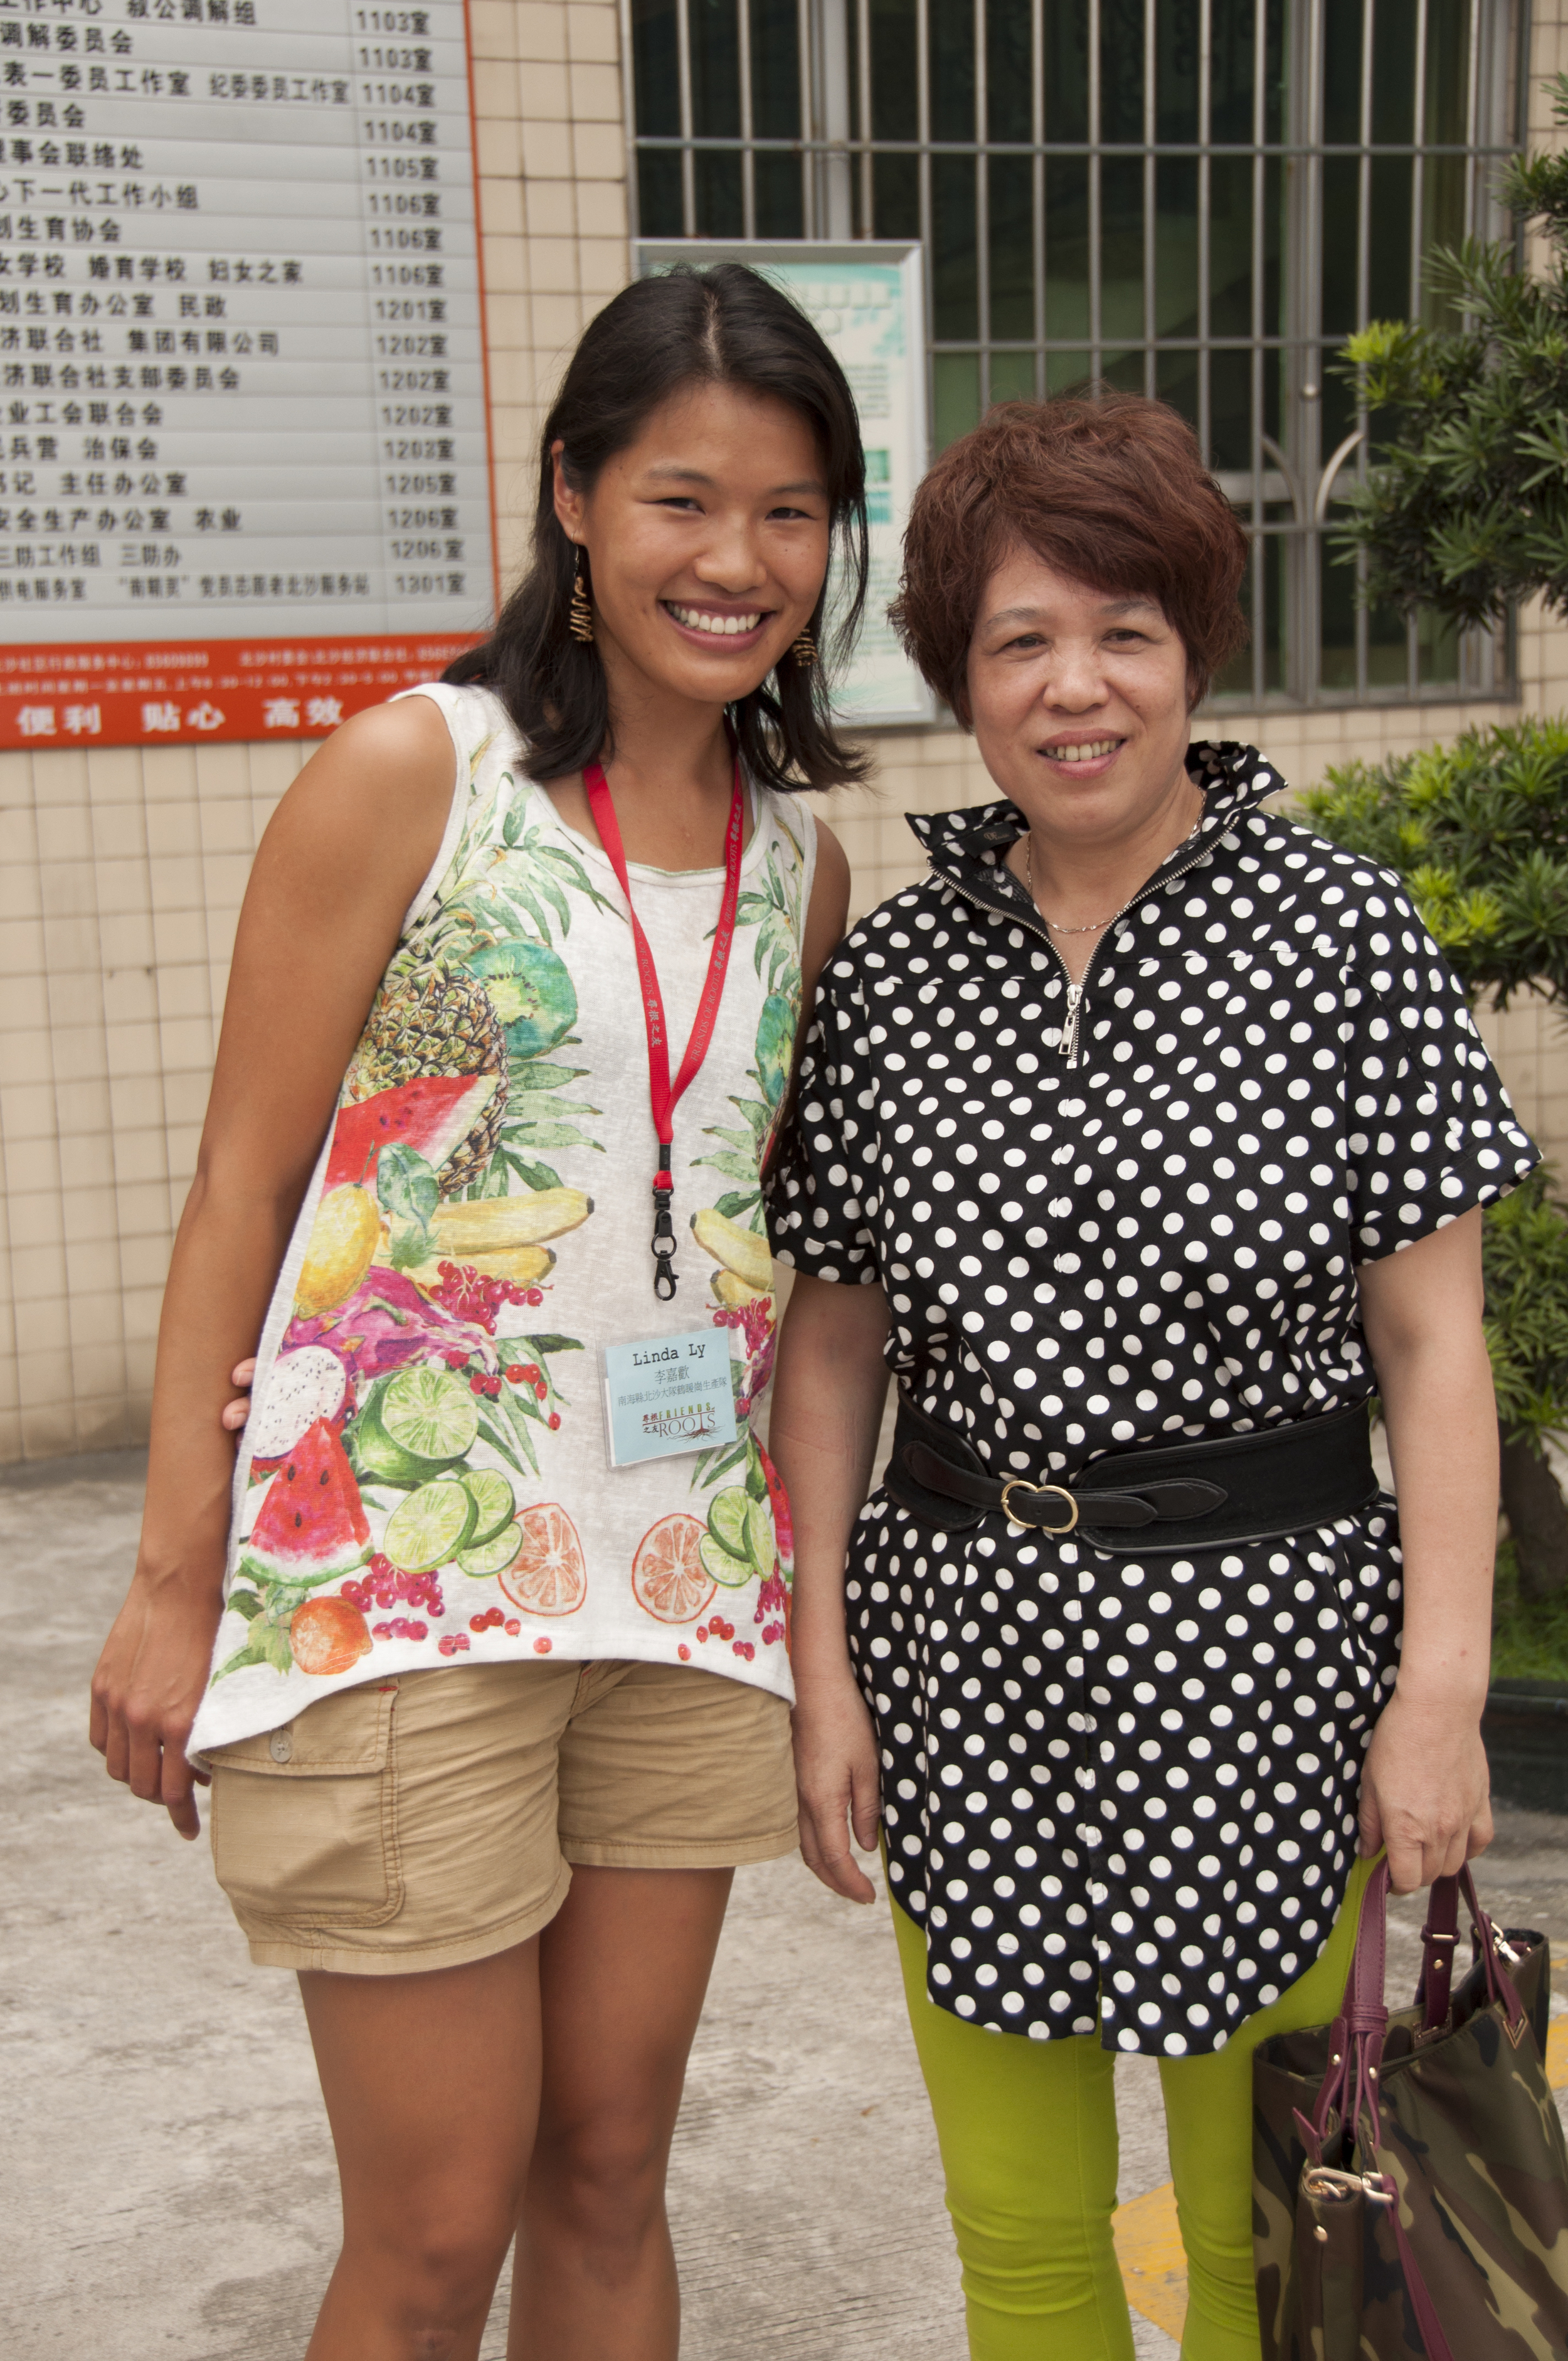 Grateful to have my aunt Ling Yi come from Hong Kong to attend my rooting.